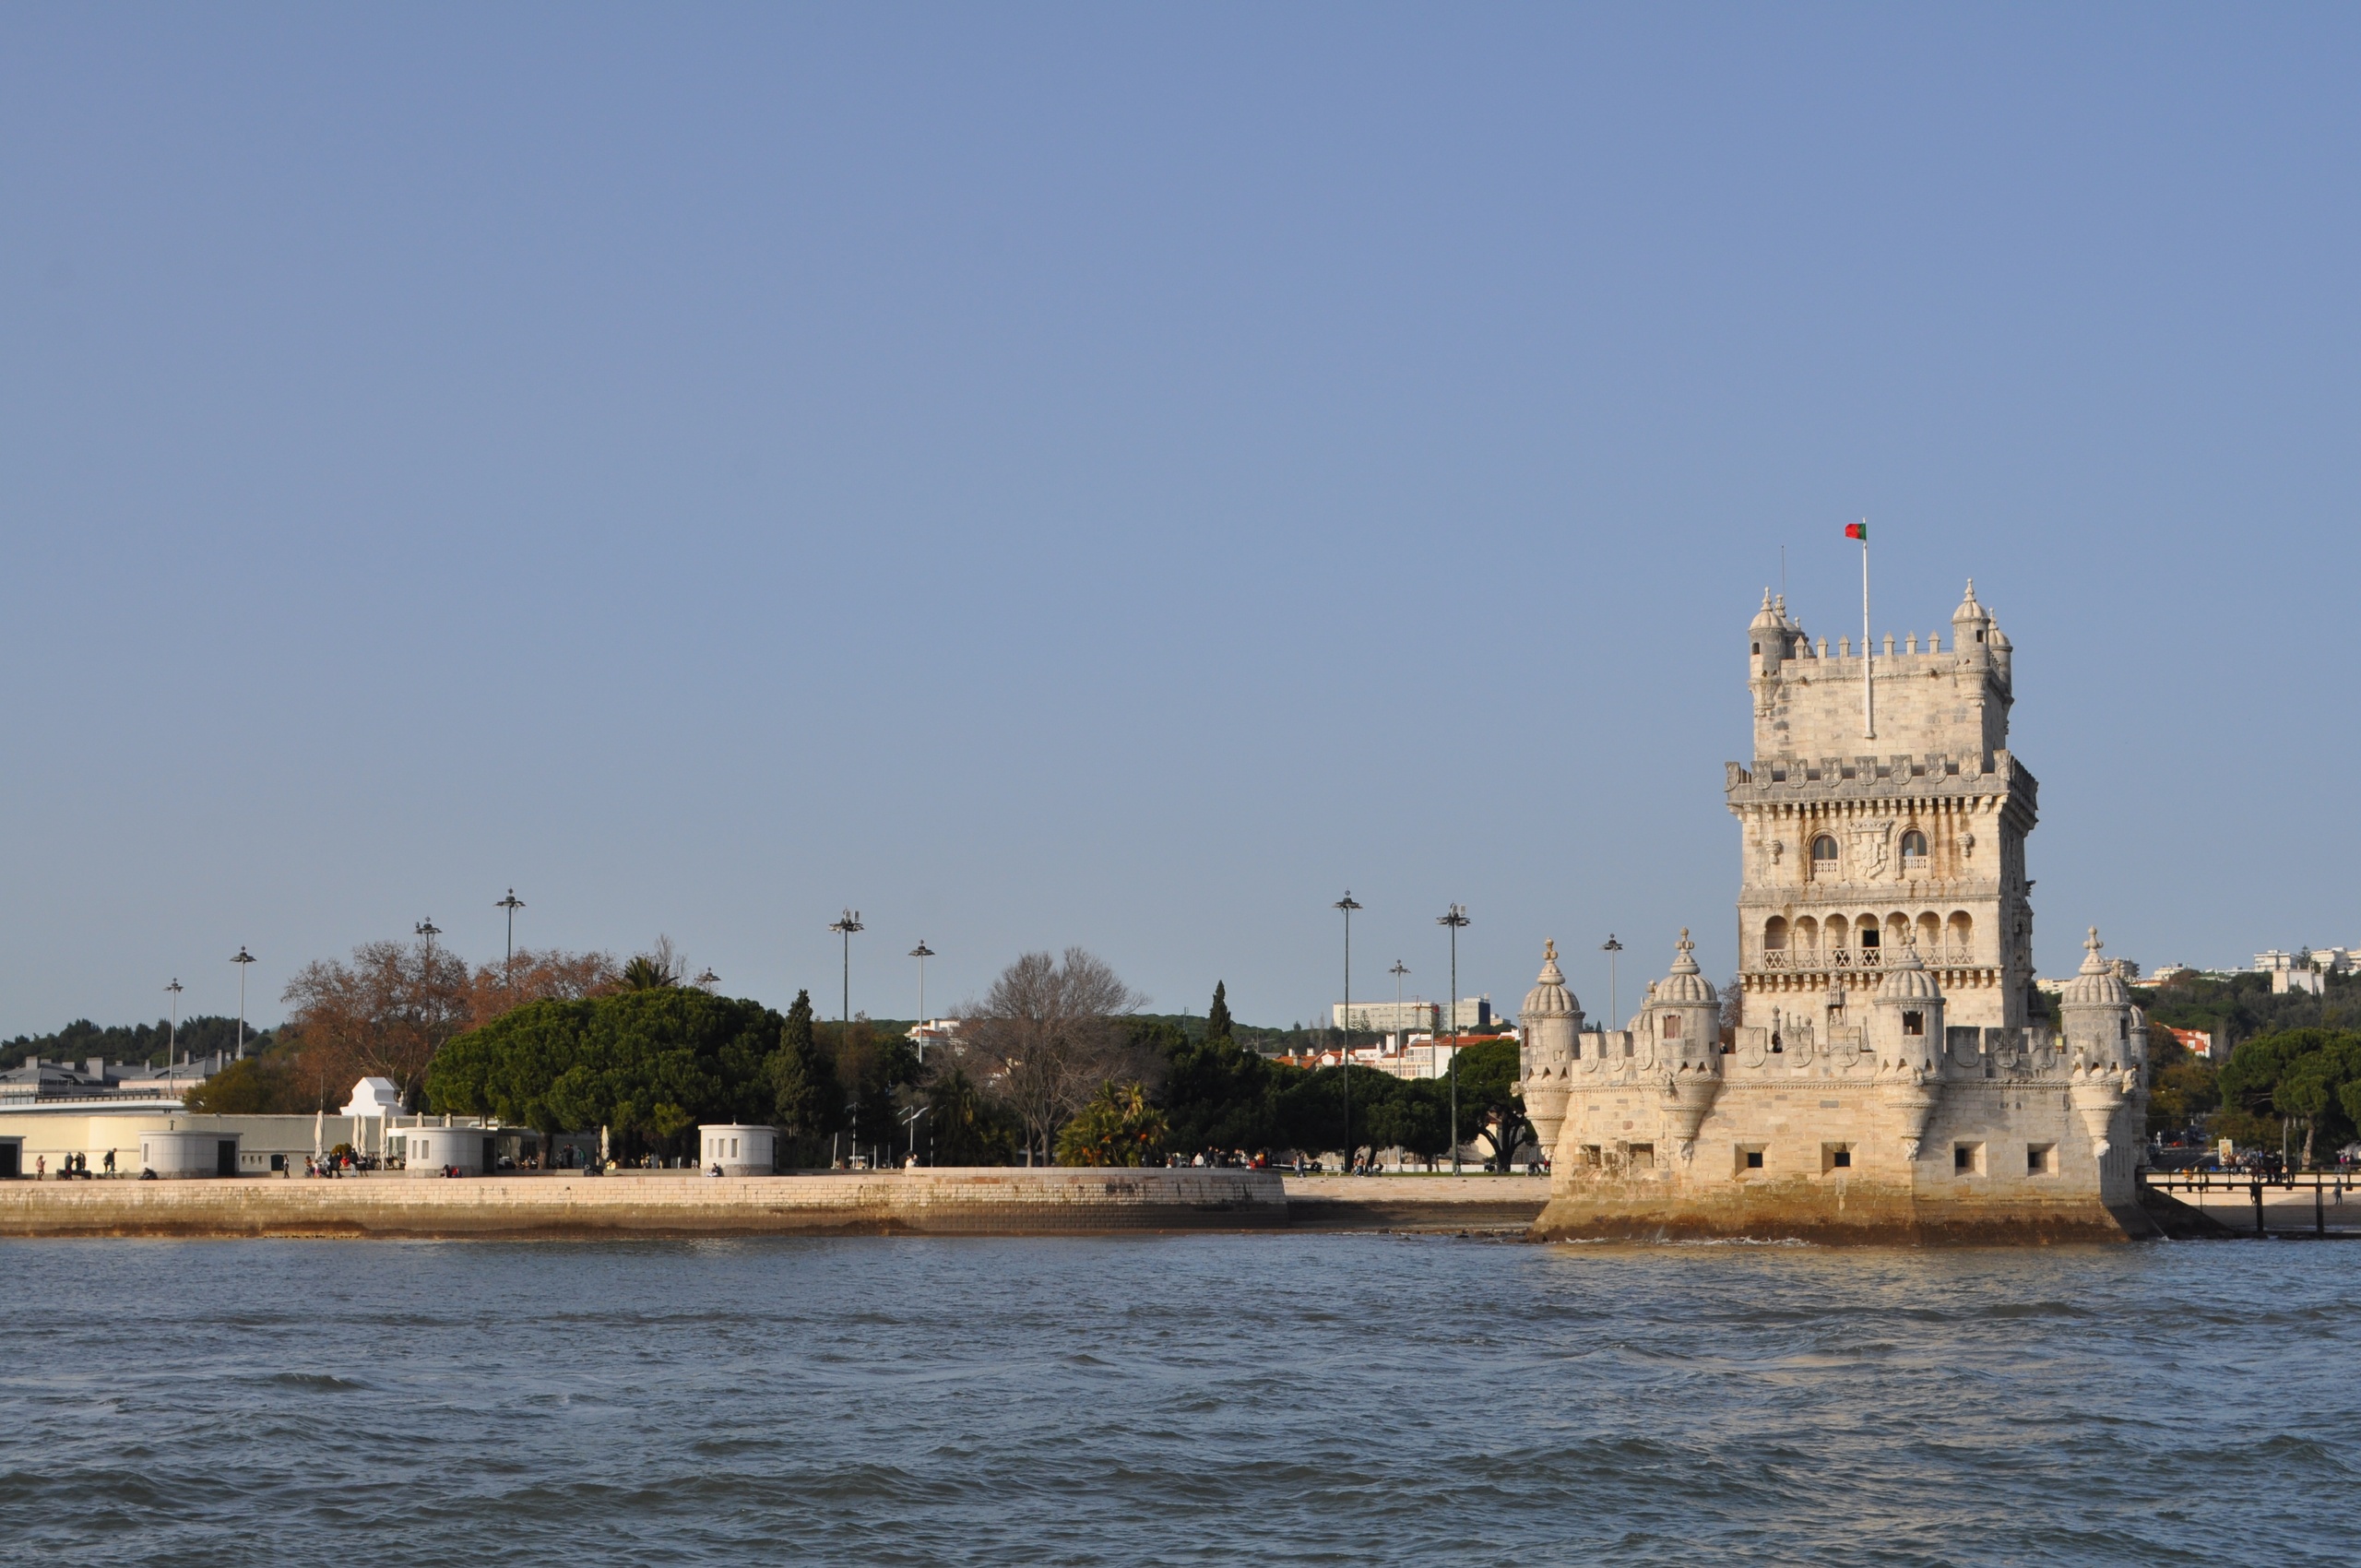 Private Sailing Tour to Discover Lisbon